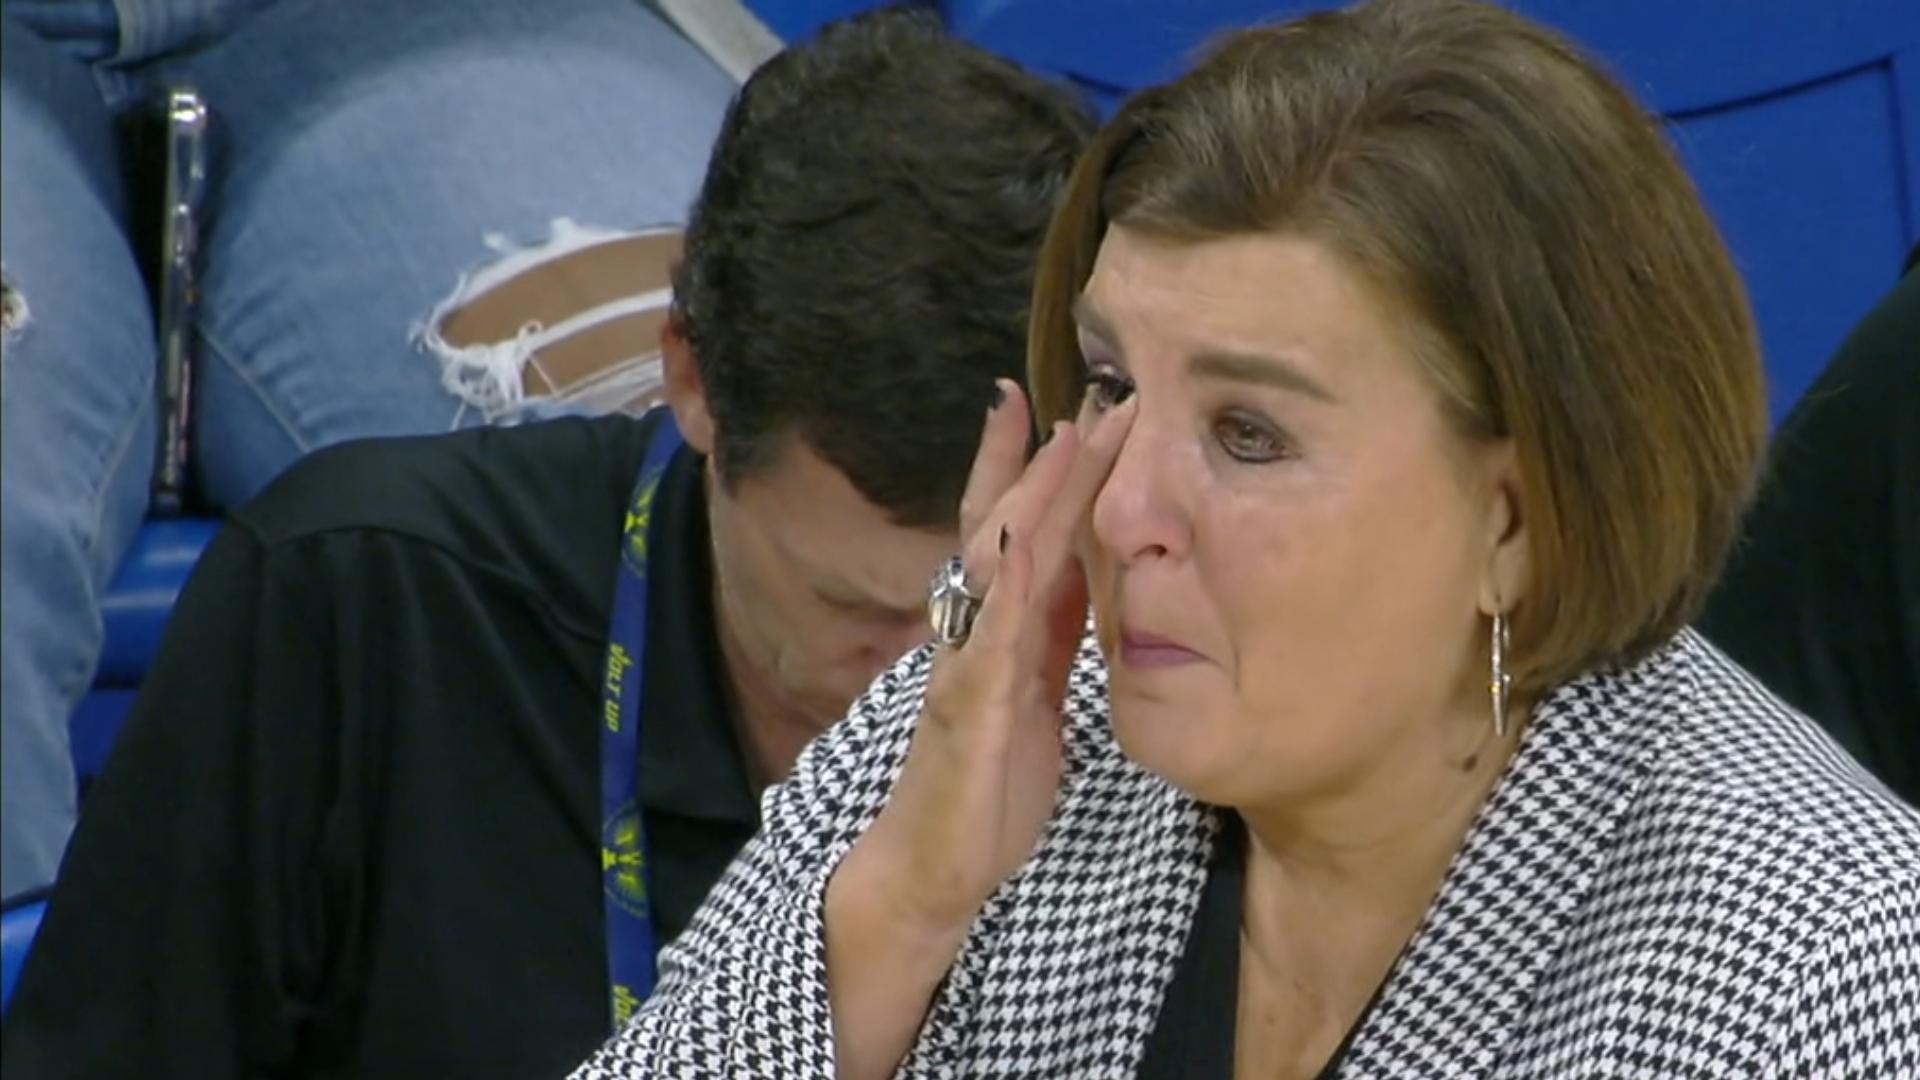 Wings coach has tears of joy after advancing in WNBA playoffs